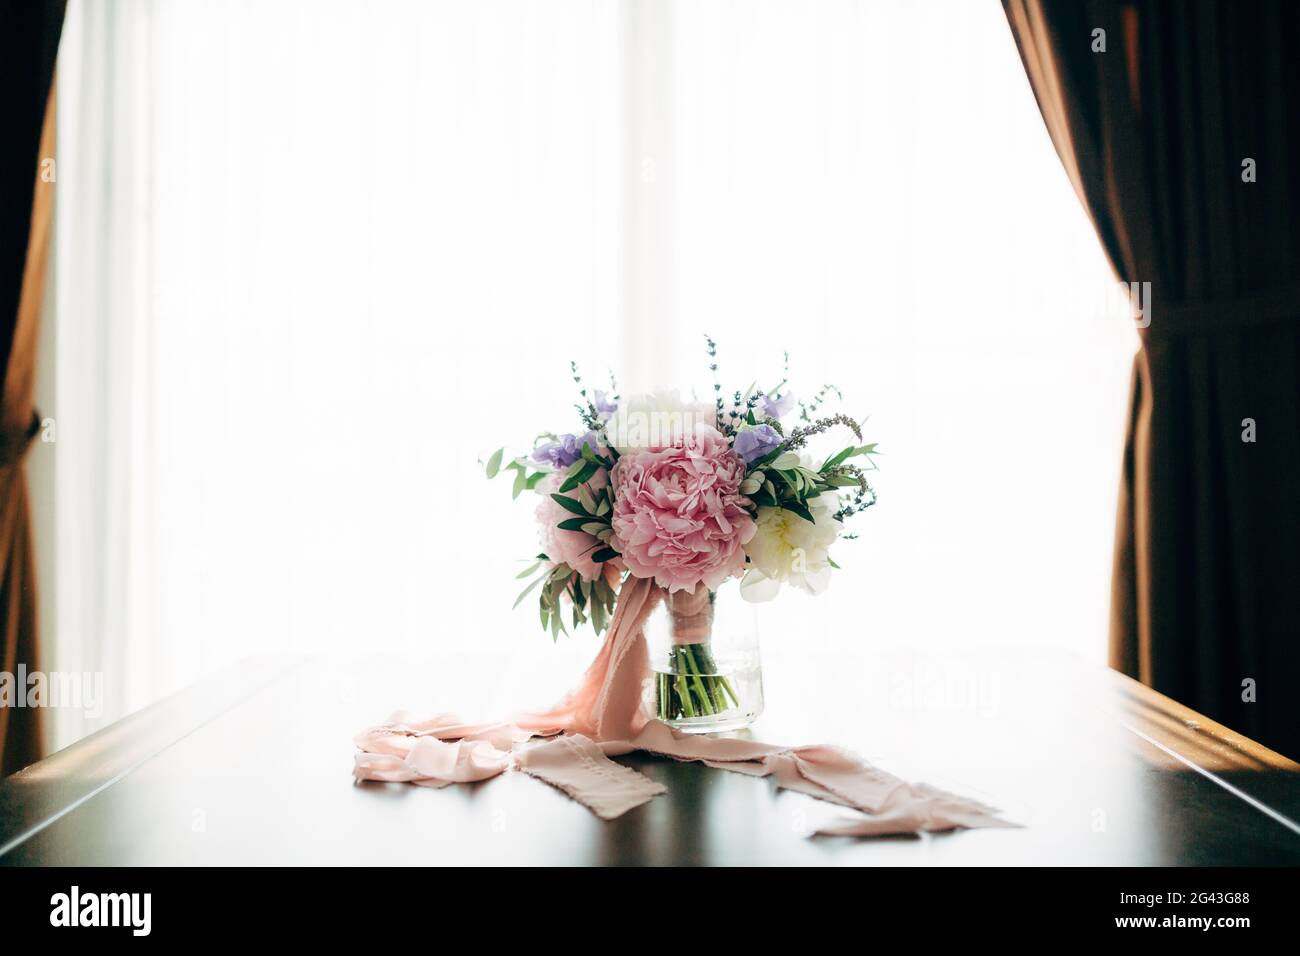 Bridal bouquet of white and pink peonies, olive branches, lavender and campanula with pink ribbons in the glass vase on the tabl Stock Photo